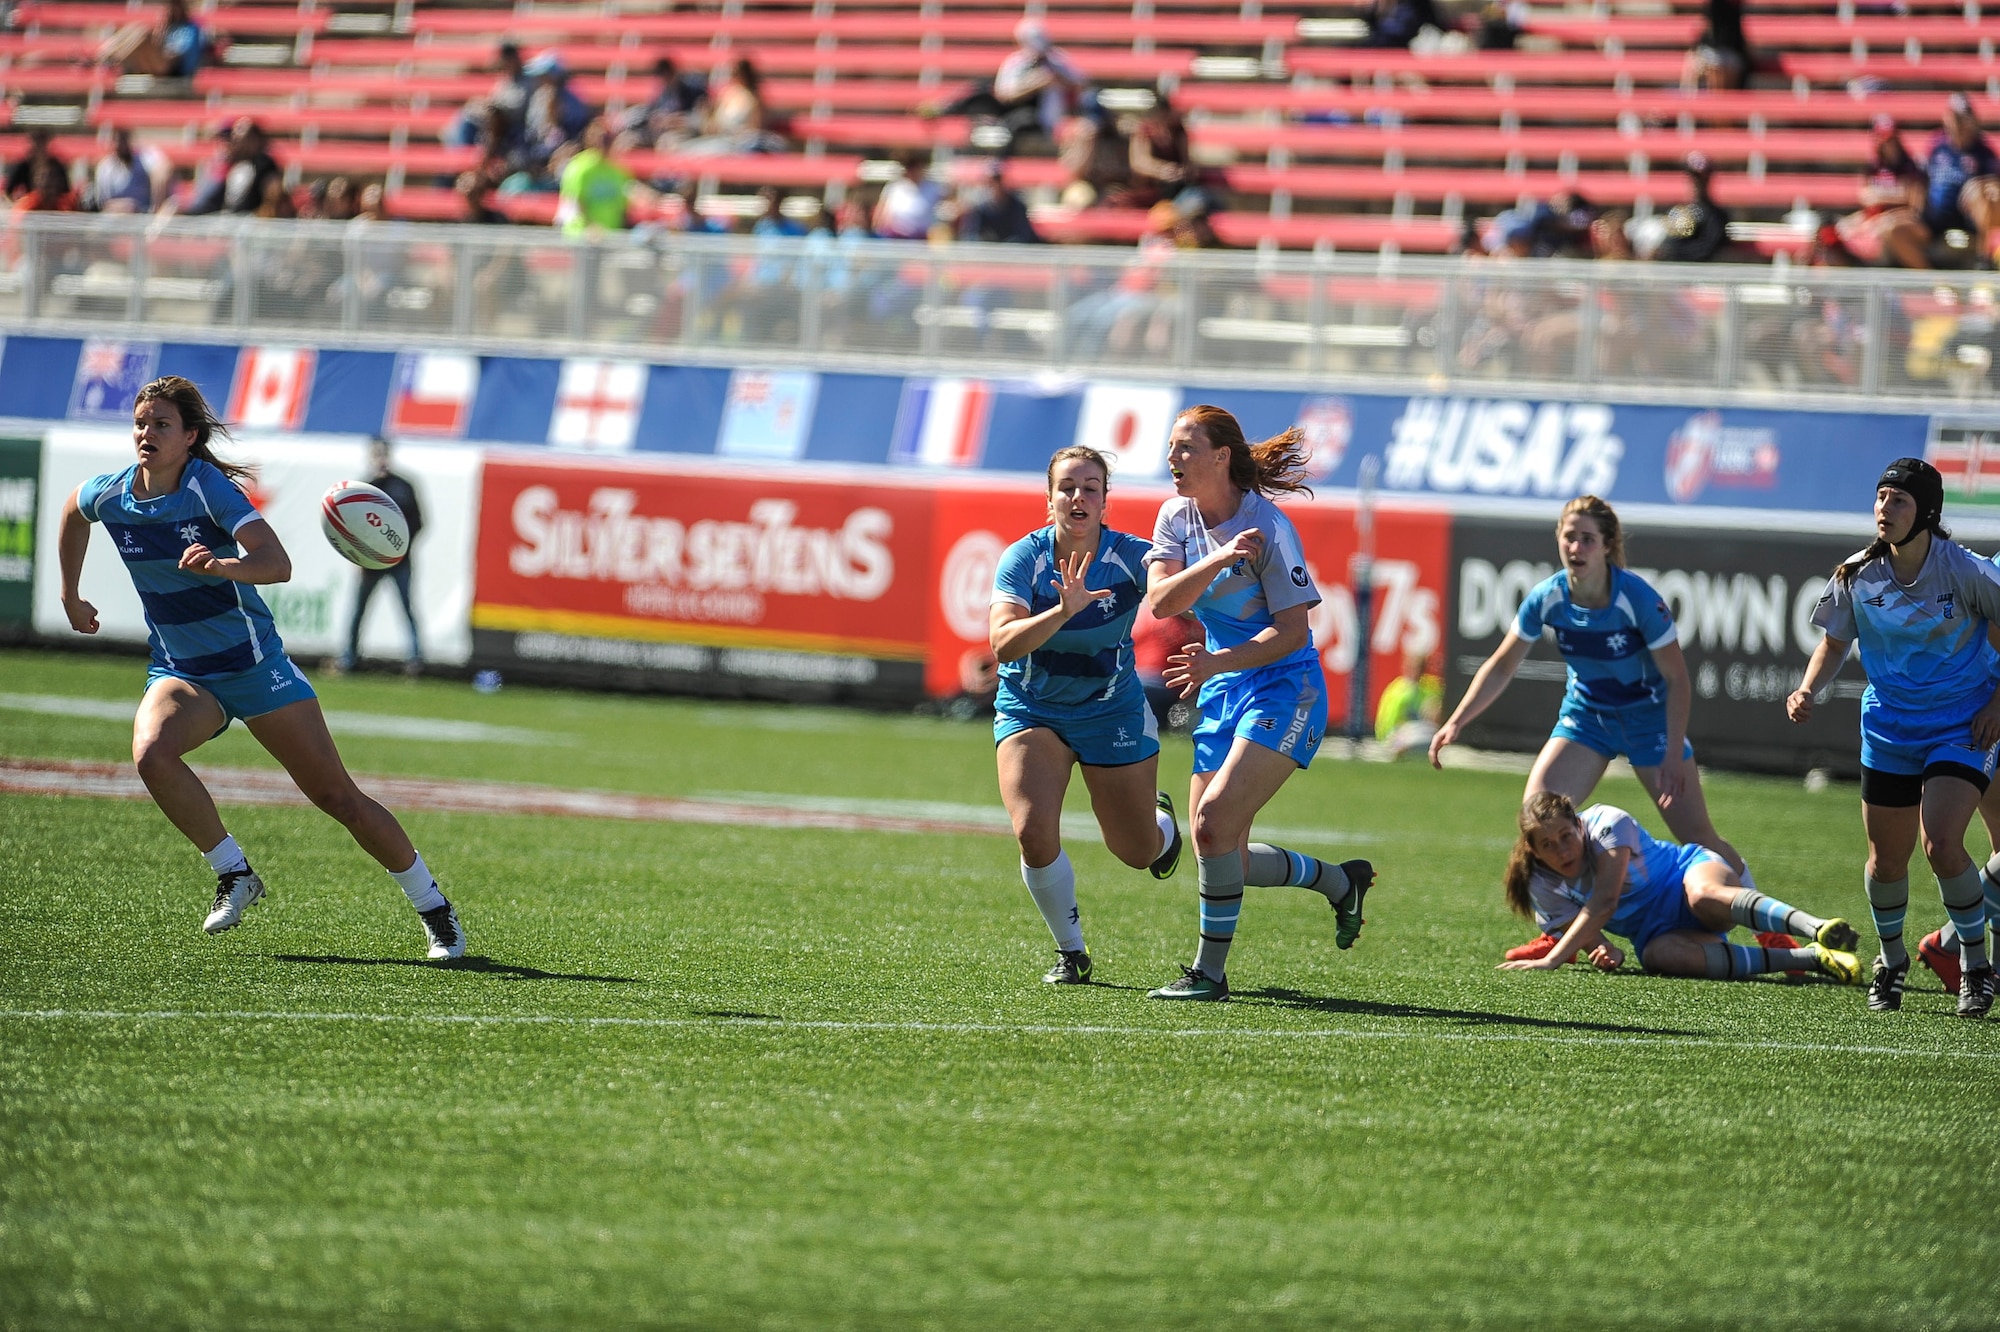 Emily Raney, a fly half on the Air Force women’s rugby sevens team, pitches the ball during a Las Vegas Invitational match in Sam Boyd Stadium, Las Vegas, March 3, 2017. USA Rugby, the national governing body for the sport of rugby union, was so supportive of the Air Force women’s rugby sevens initiative that the team’s final game of pool play was moved to the 35,000-seat Sam Boyd Stadium and played in conjunction with the HSBC World Series’ Las Vegas stop. (U.S. Air Force photo by Staff Sgt. Siuta B. Ika)